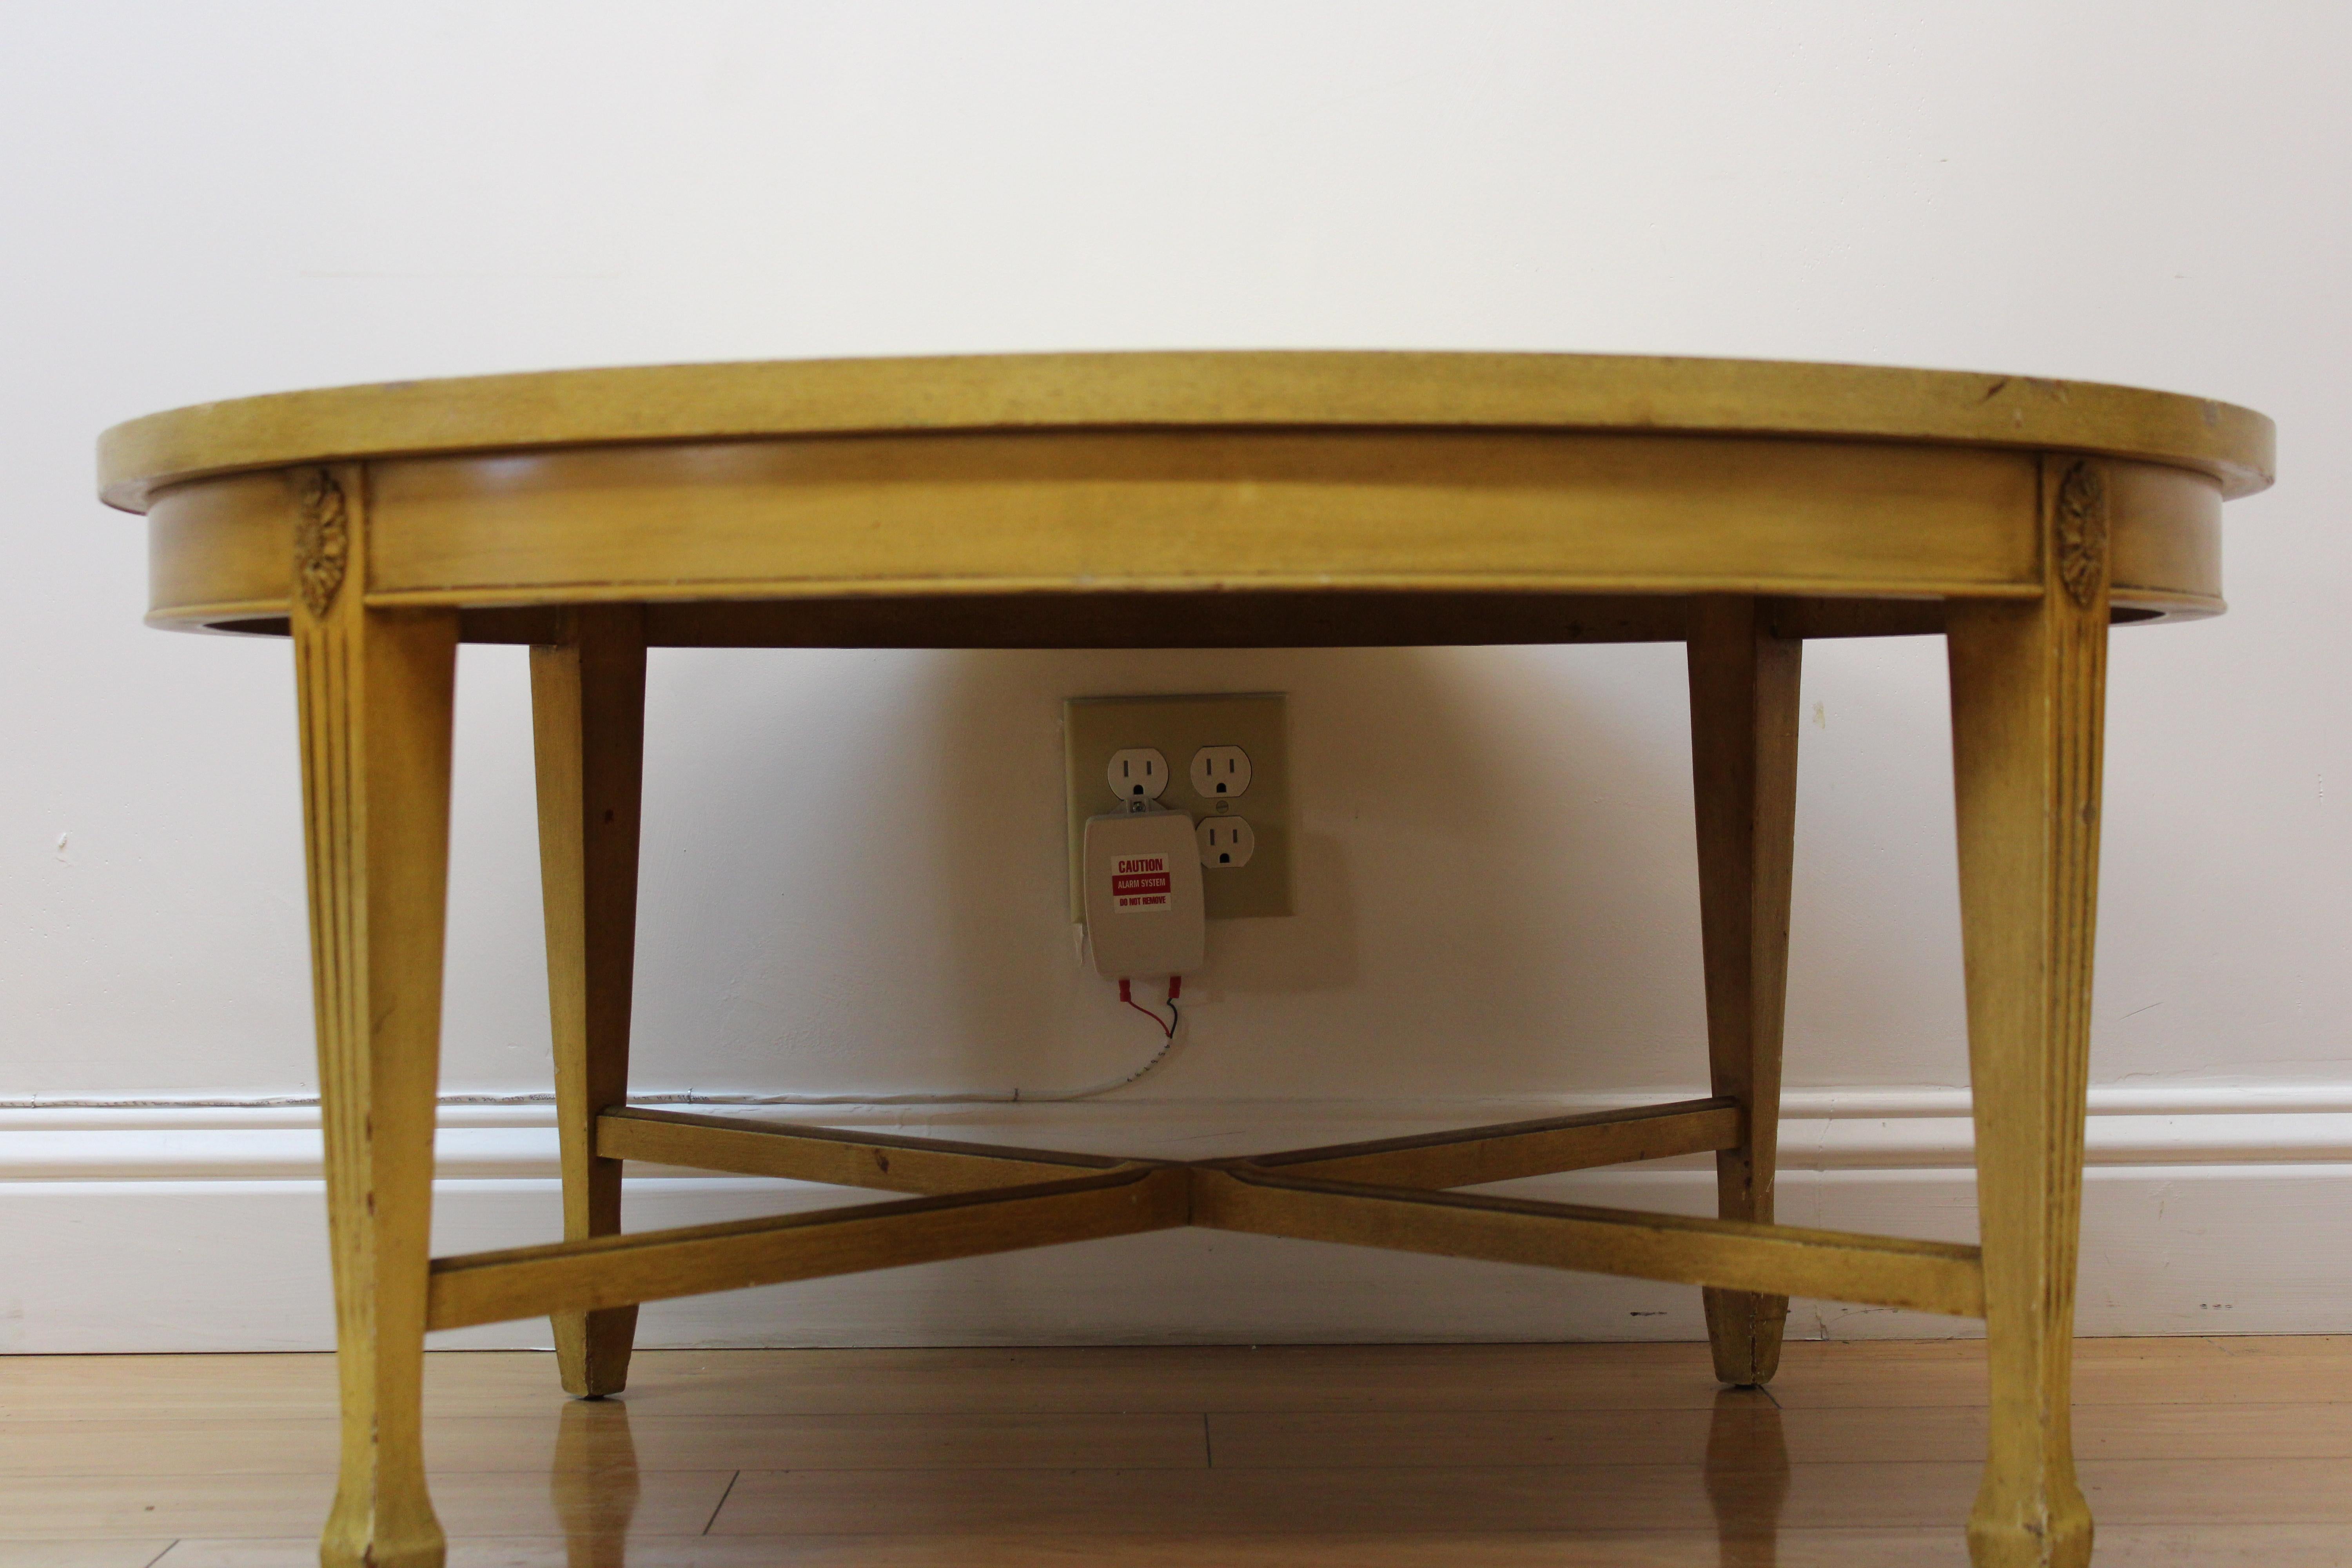 C. 20th Century

Italian Mid Century Neoclassical Style Painted Decorated Circular Coffee Table